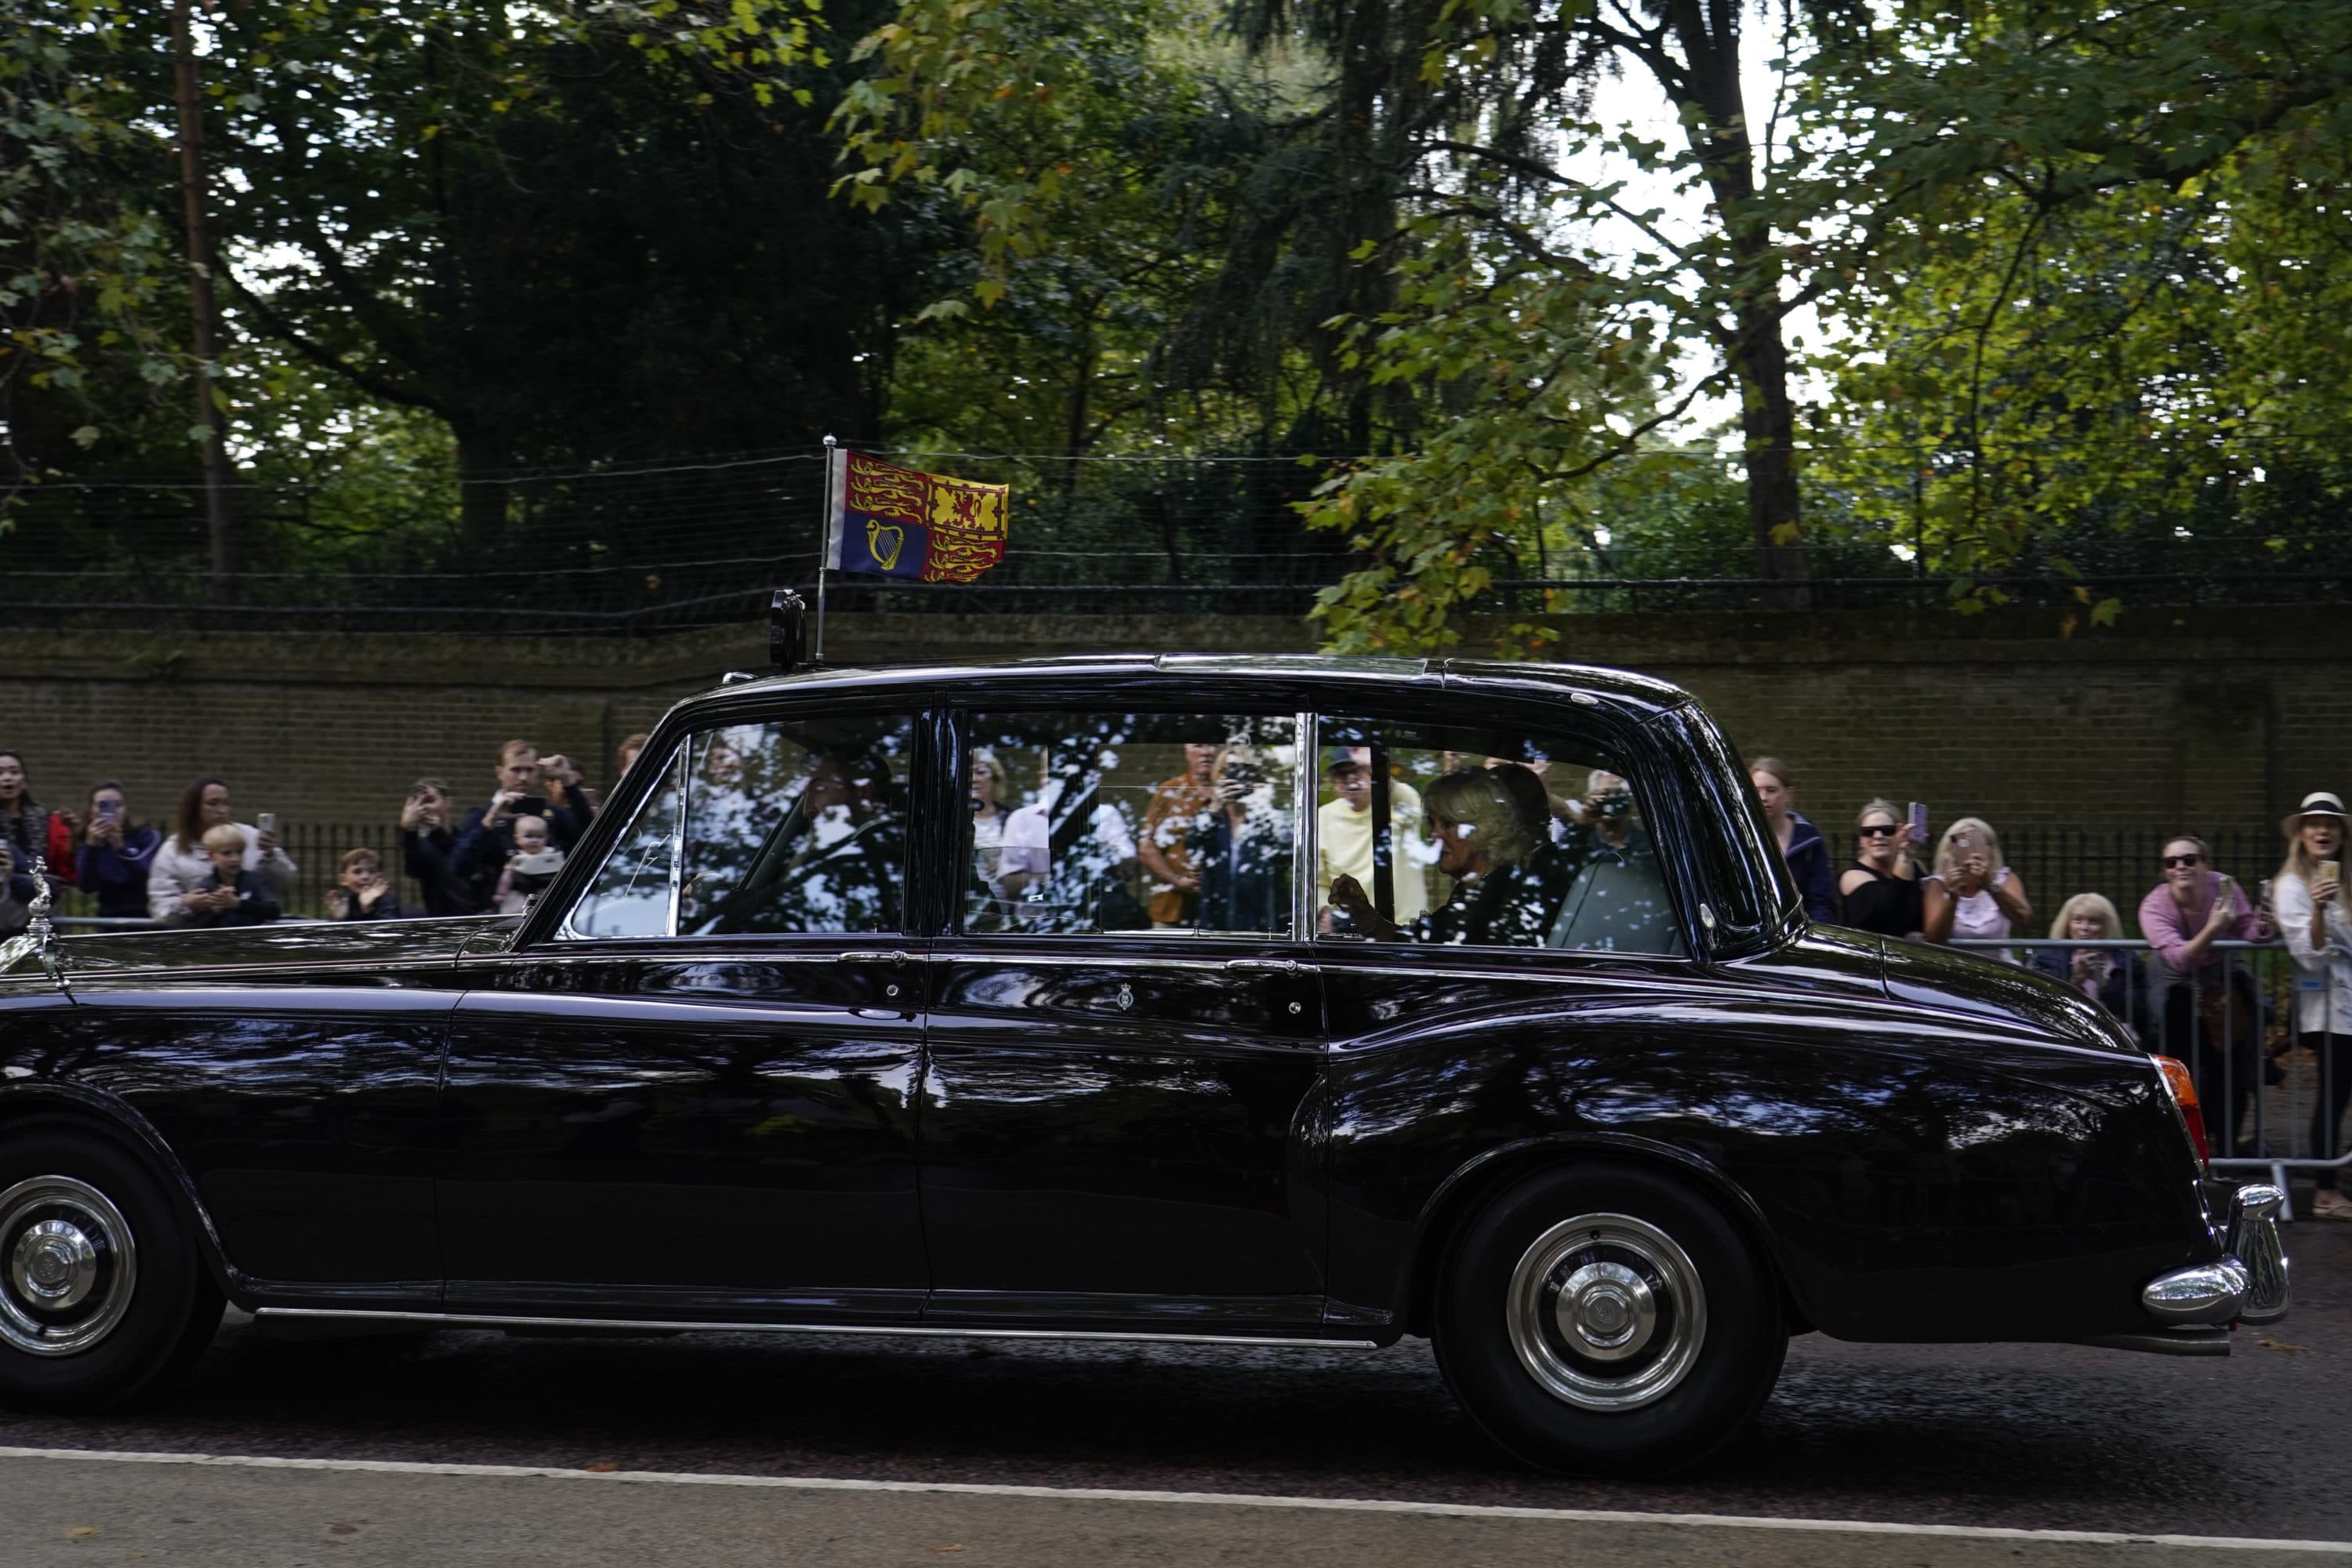 The car carrying King Charles III and Camilla, the Queen Consort, heads to Buckingham Palace in London, Sept. 9. (Alberto Pezzali/AP)